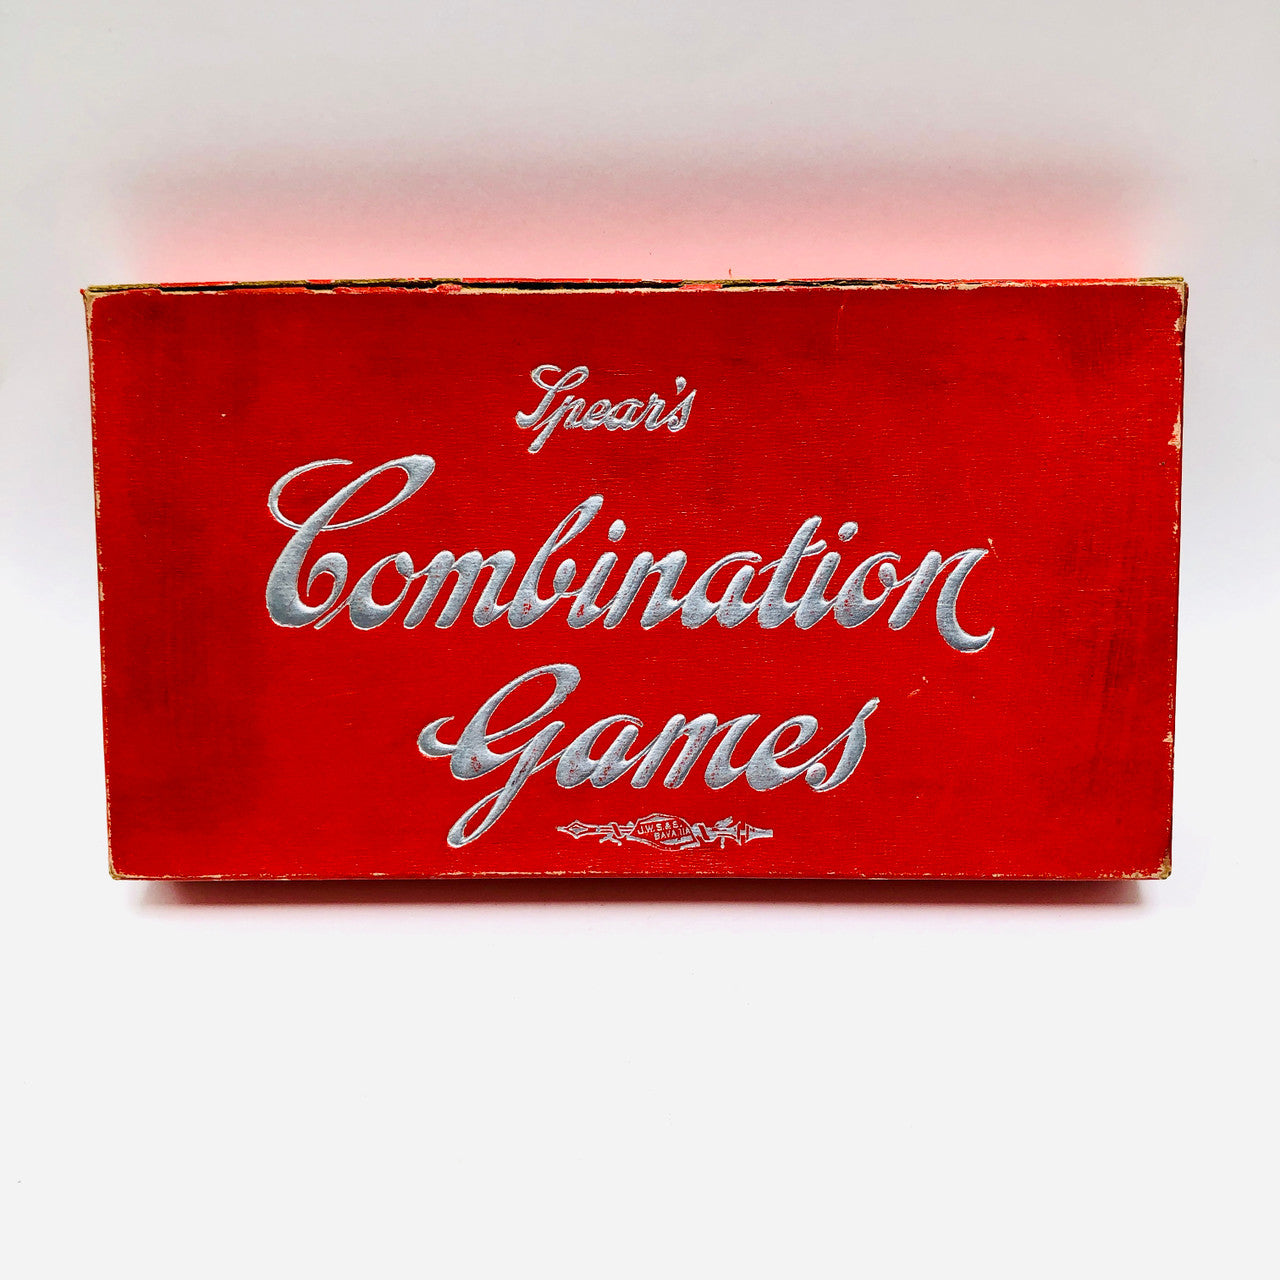 Vintage, Combination, Board Games, Spear's Combination Games, J W S Bavaria